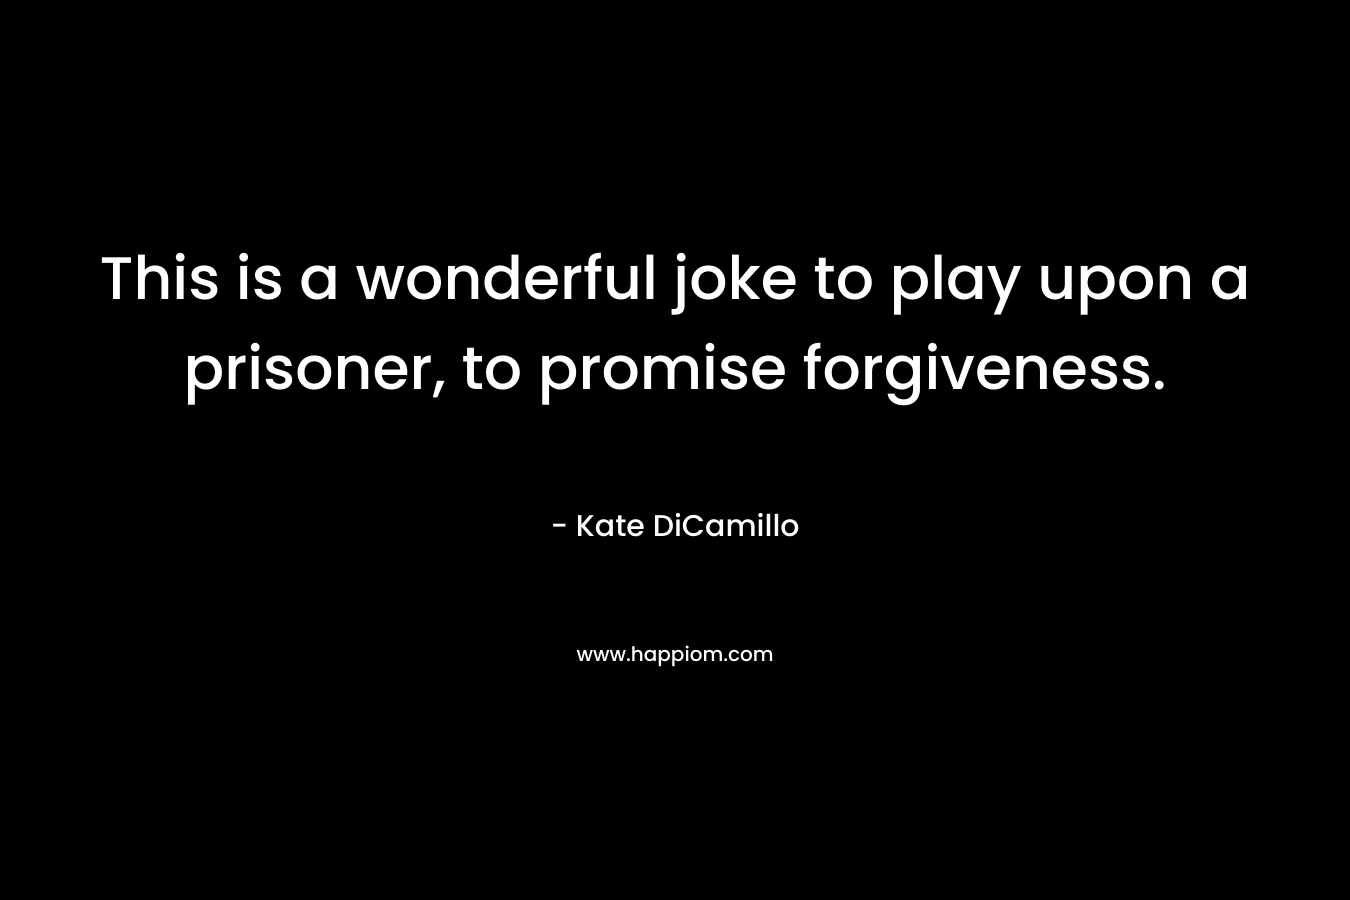 This is a wonderful joke to play upon a prisoner, to promise forgiveness. – Kate DiCamillo